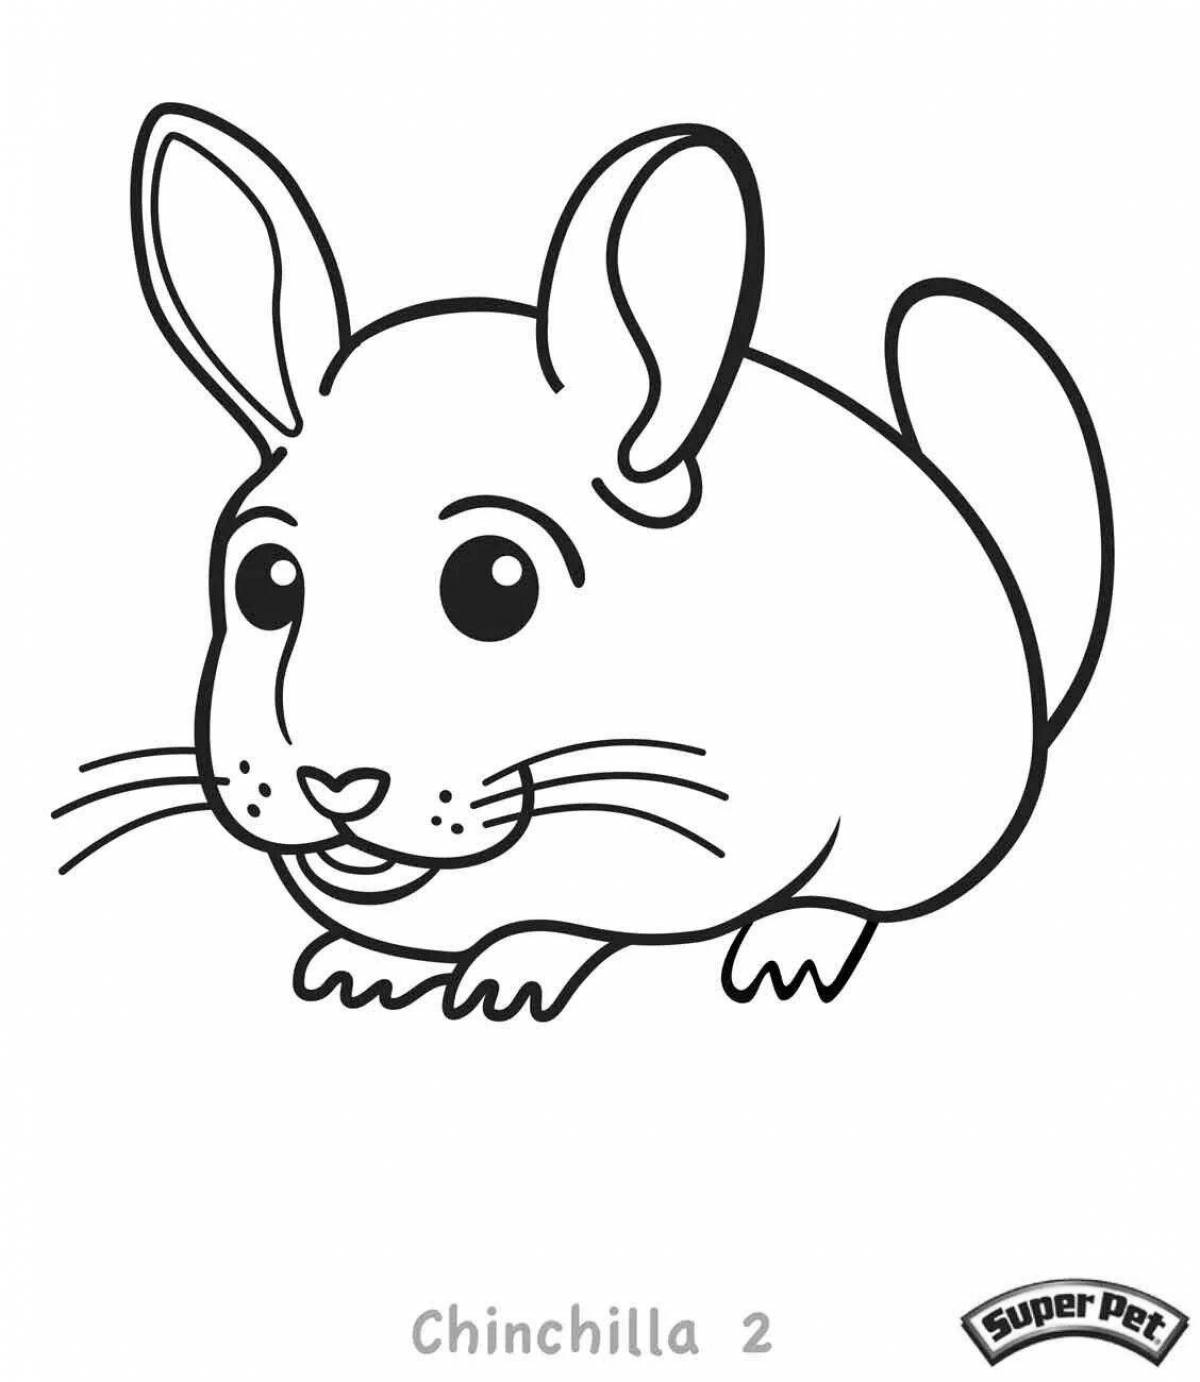 Exciting coloring of chinchillas for juniors